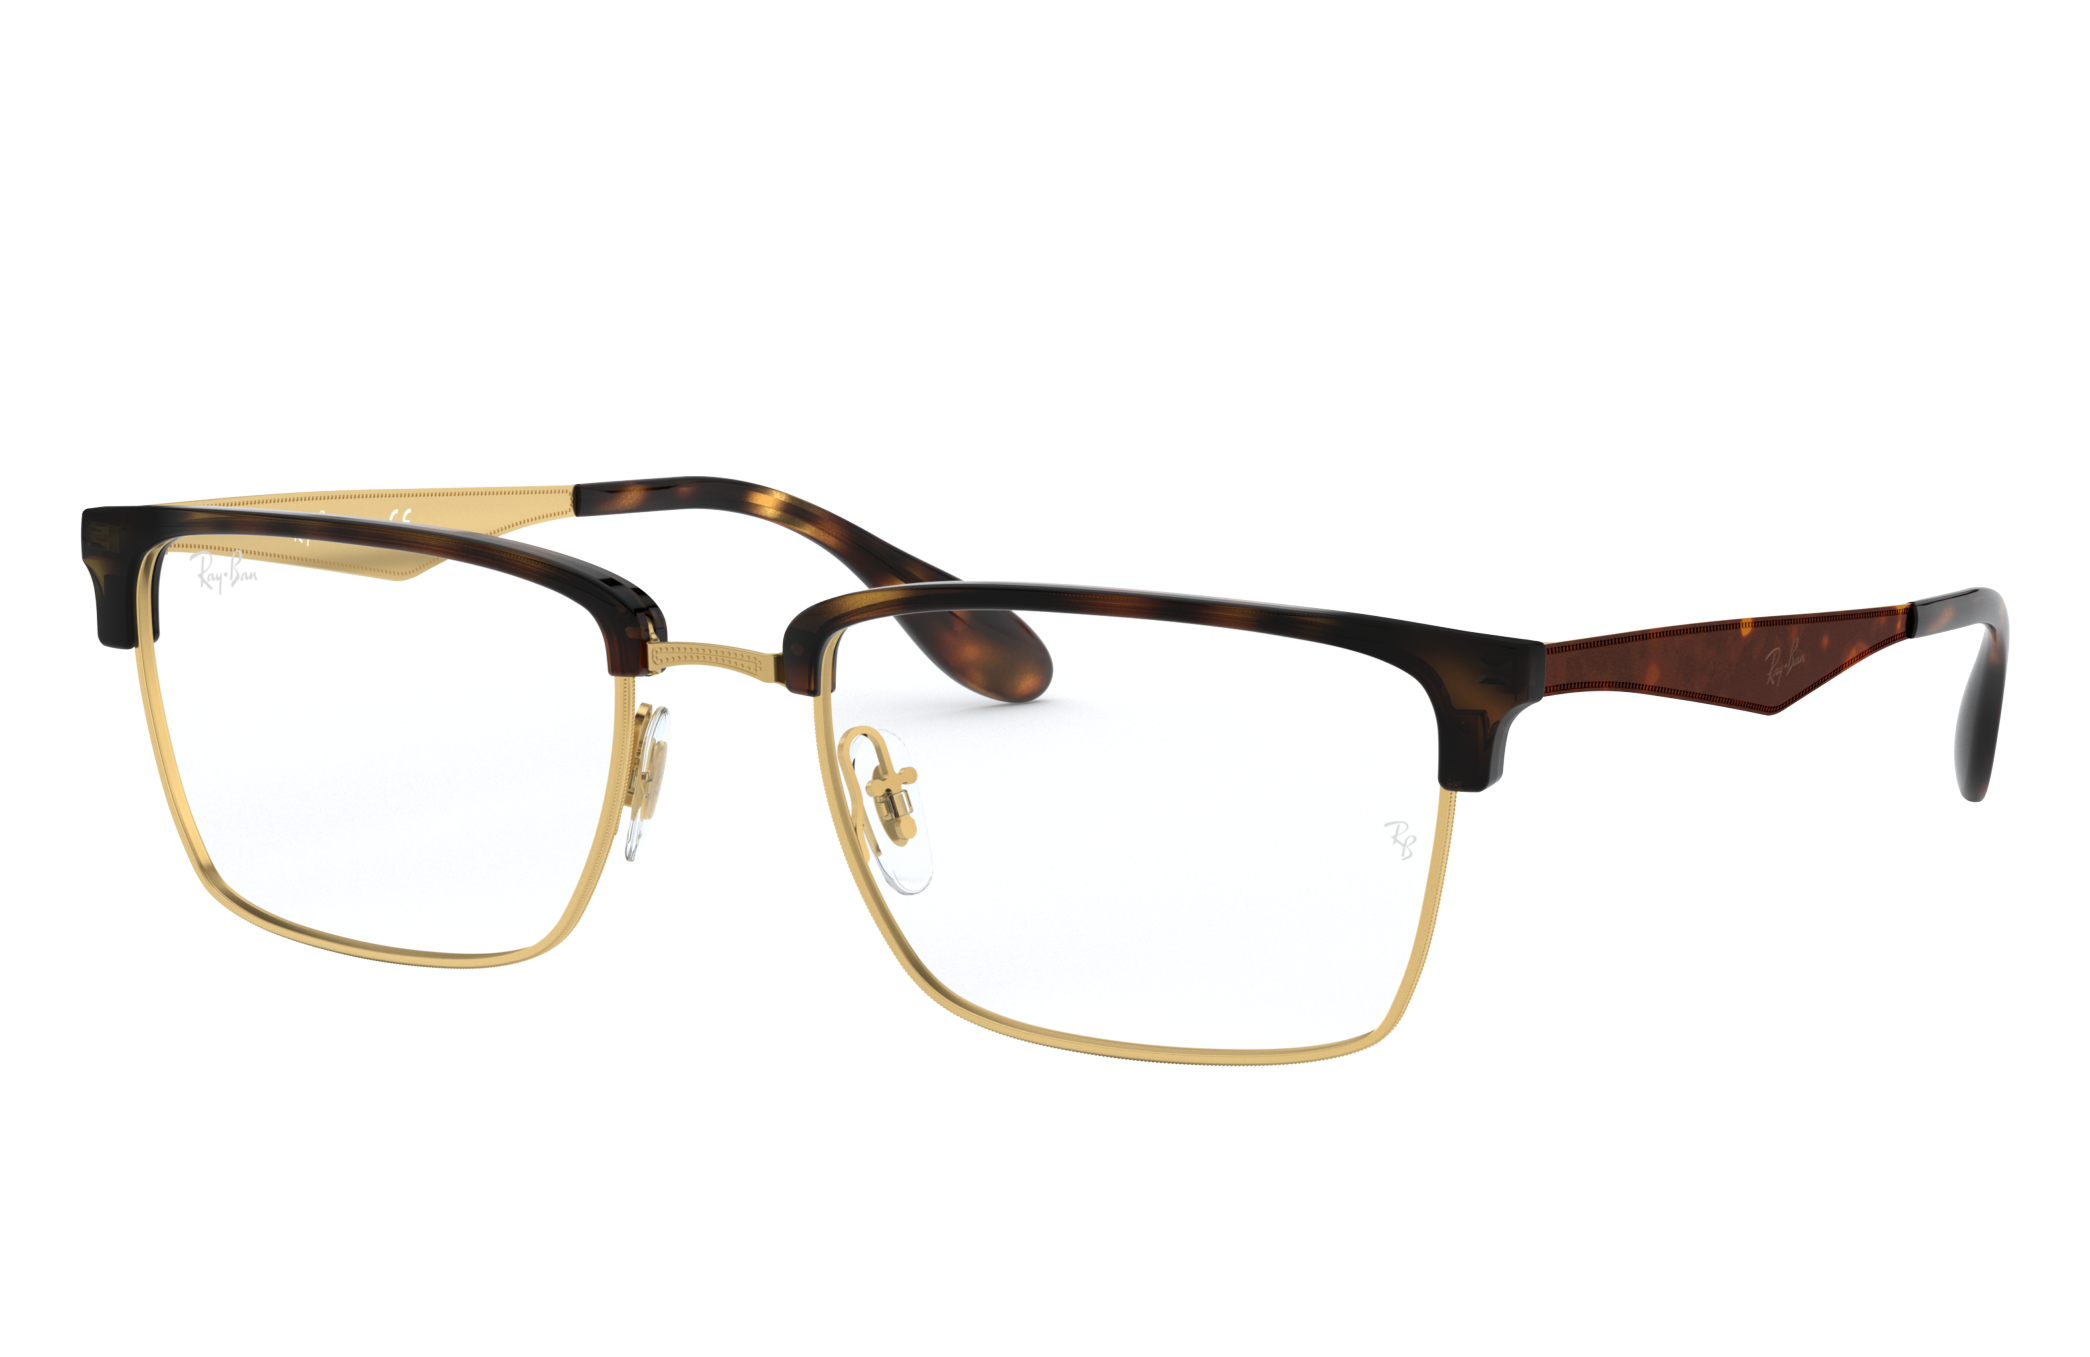 Rb6397 Eyeglasses with Gold Frame | Ray-Ban®